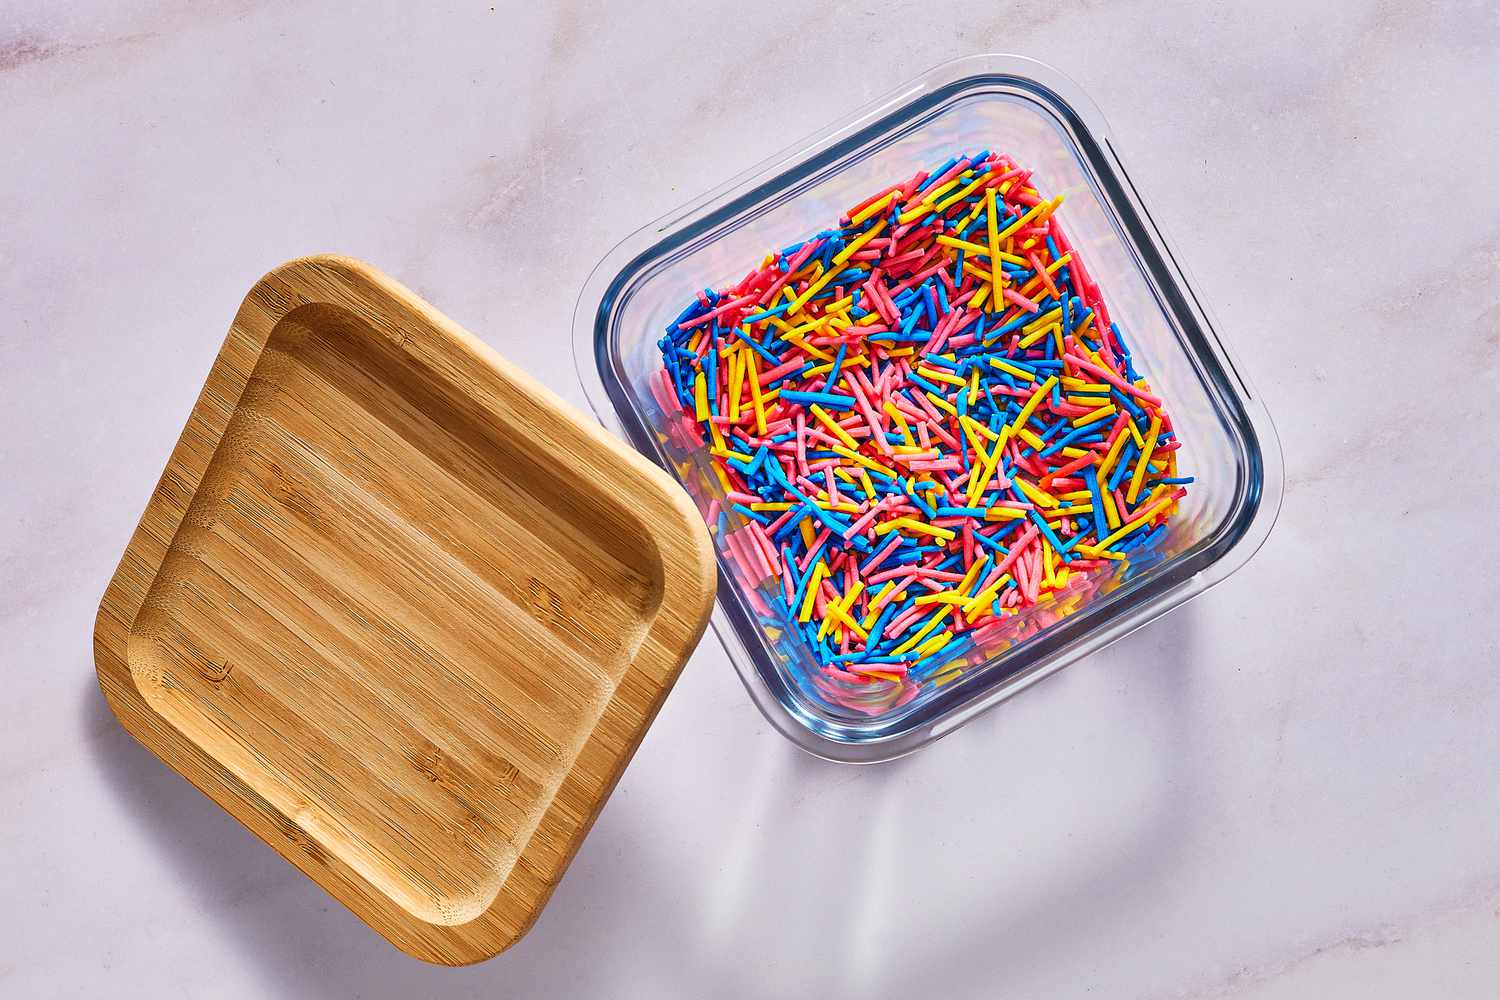 A container fulled with homemade sprinkles and a lid